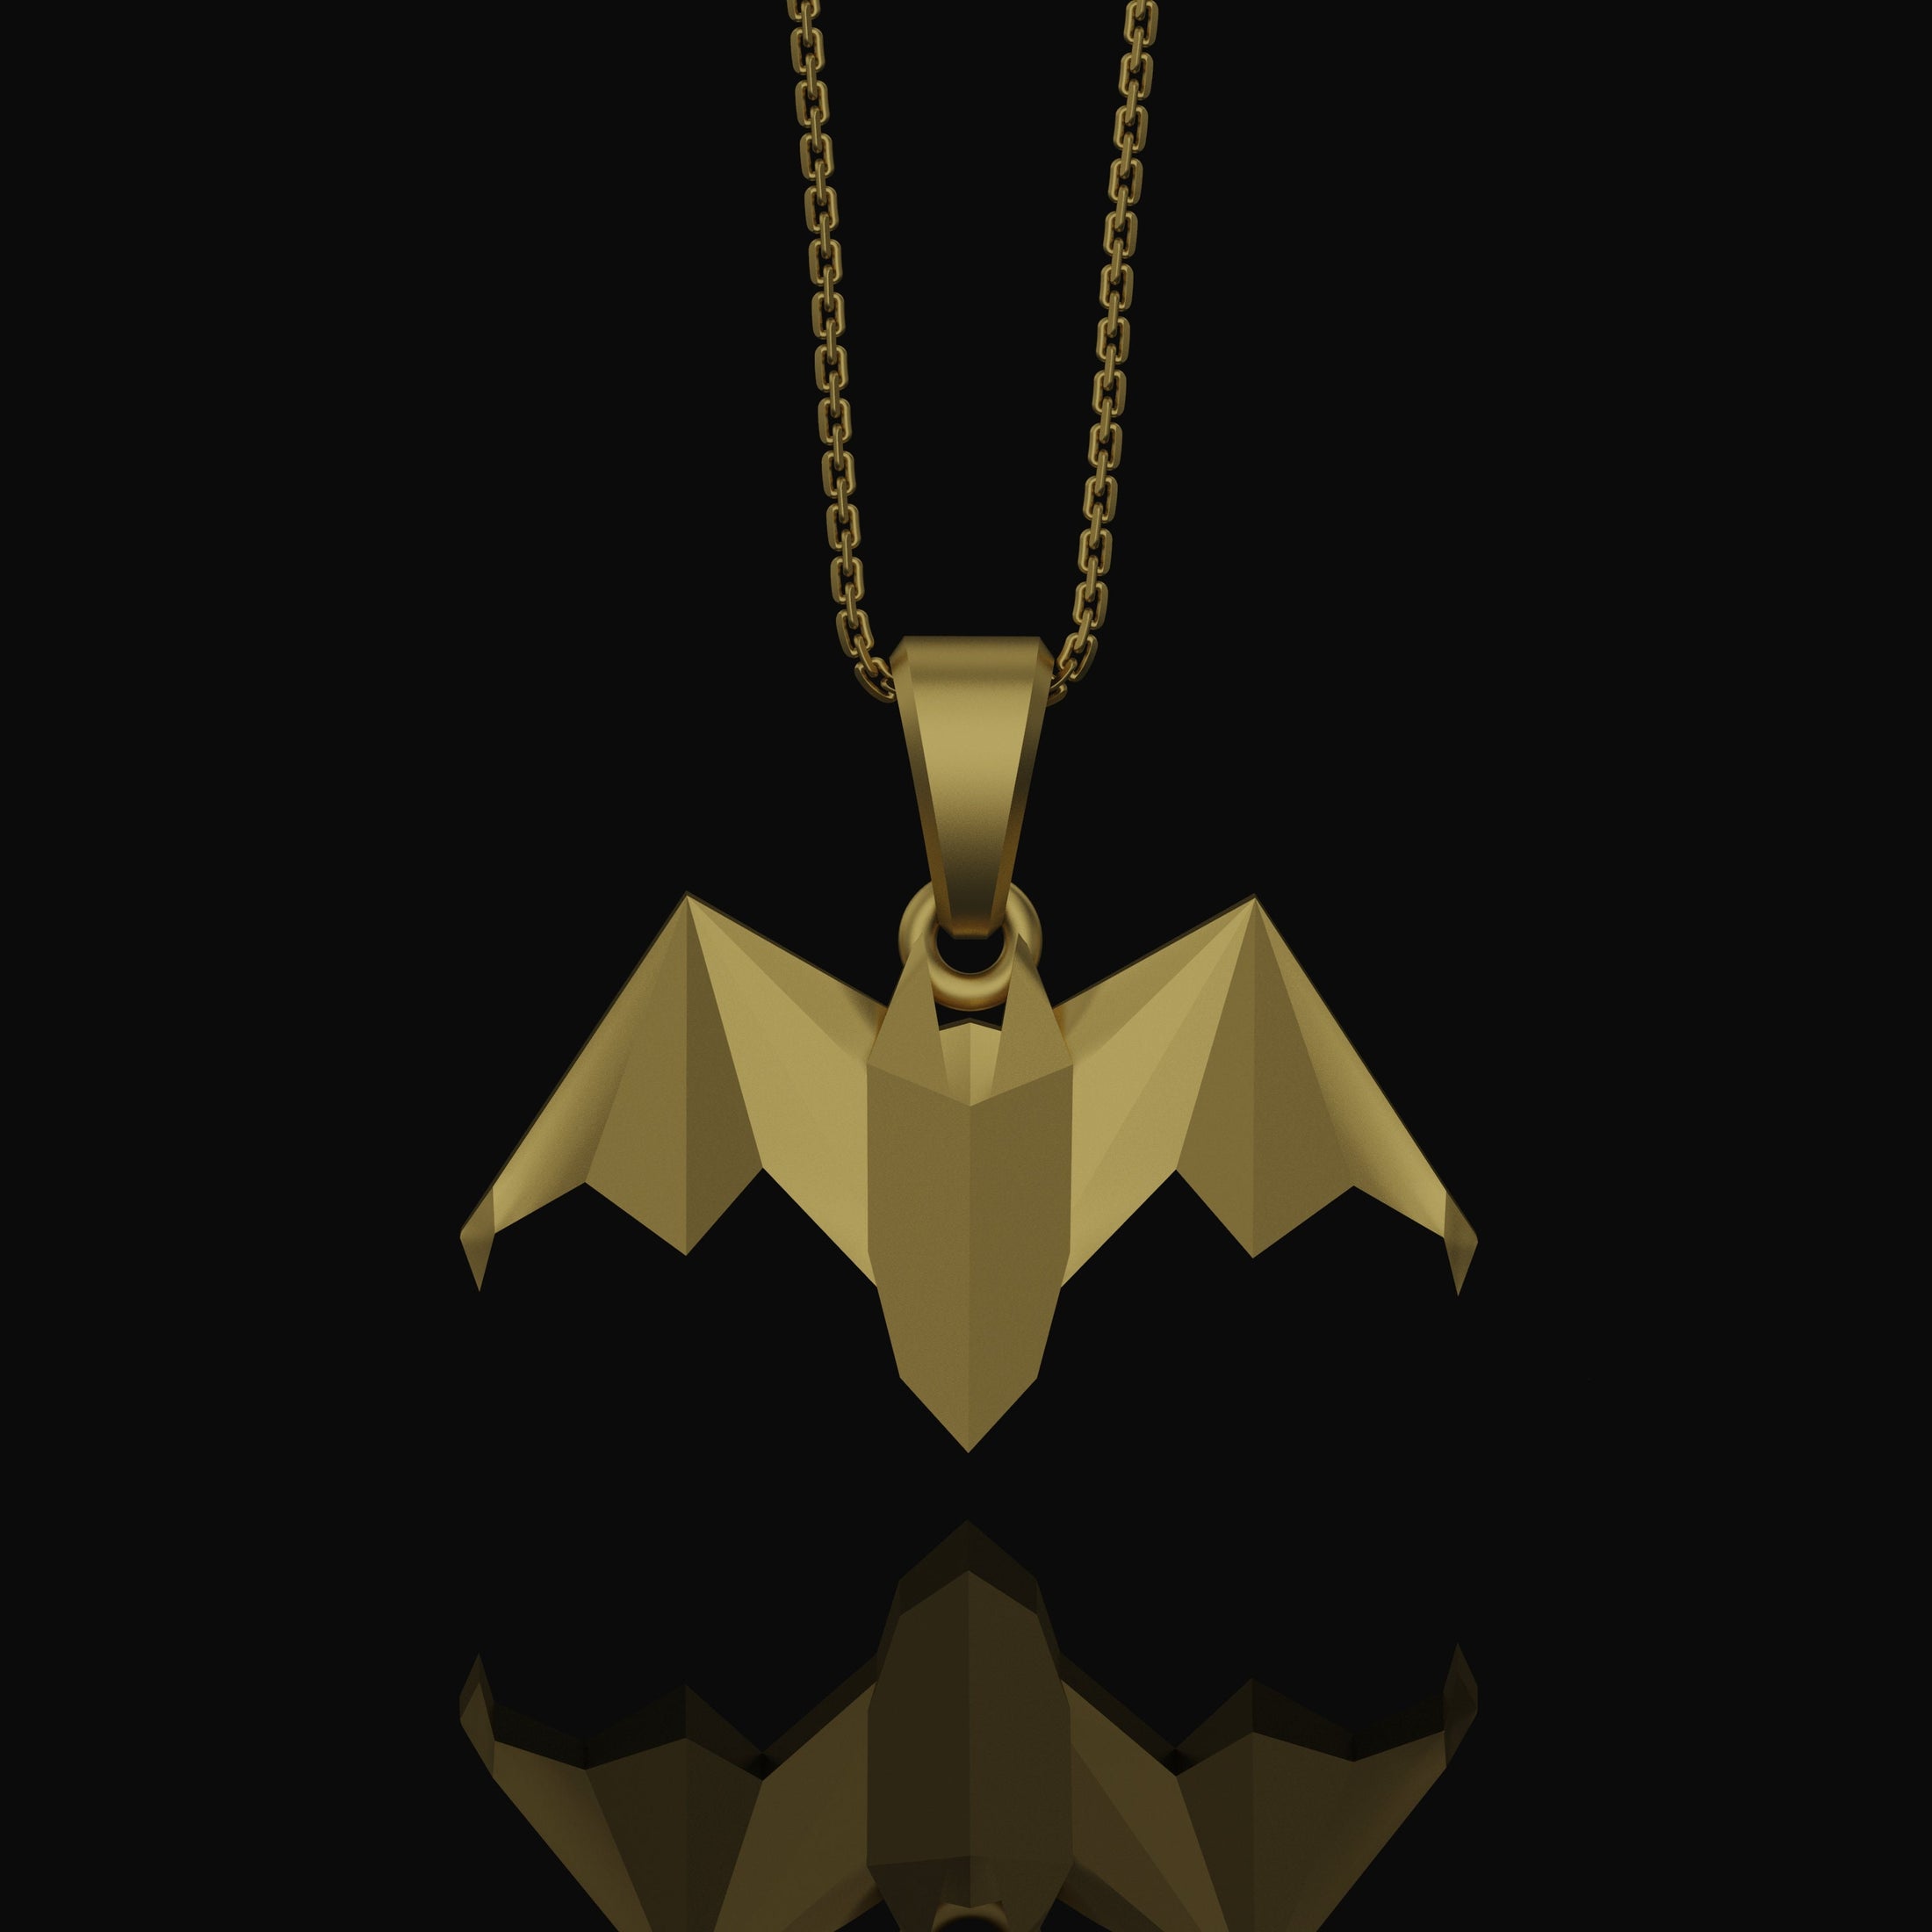 Silver Origami Bat Necklace - Unique Gothic Nocturnal Pendant, Elegant Folded Bat Charm, Perfect Dark Style Gift for Him